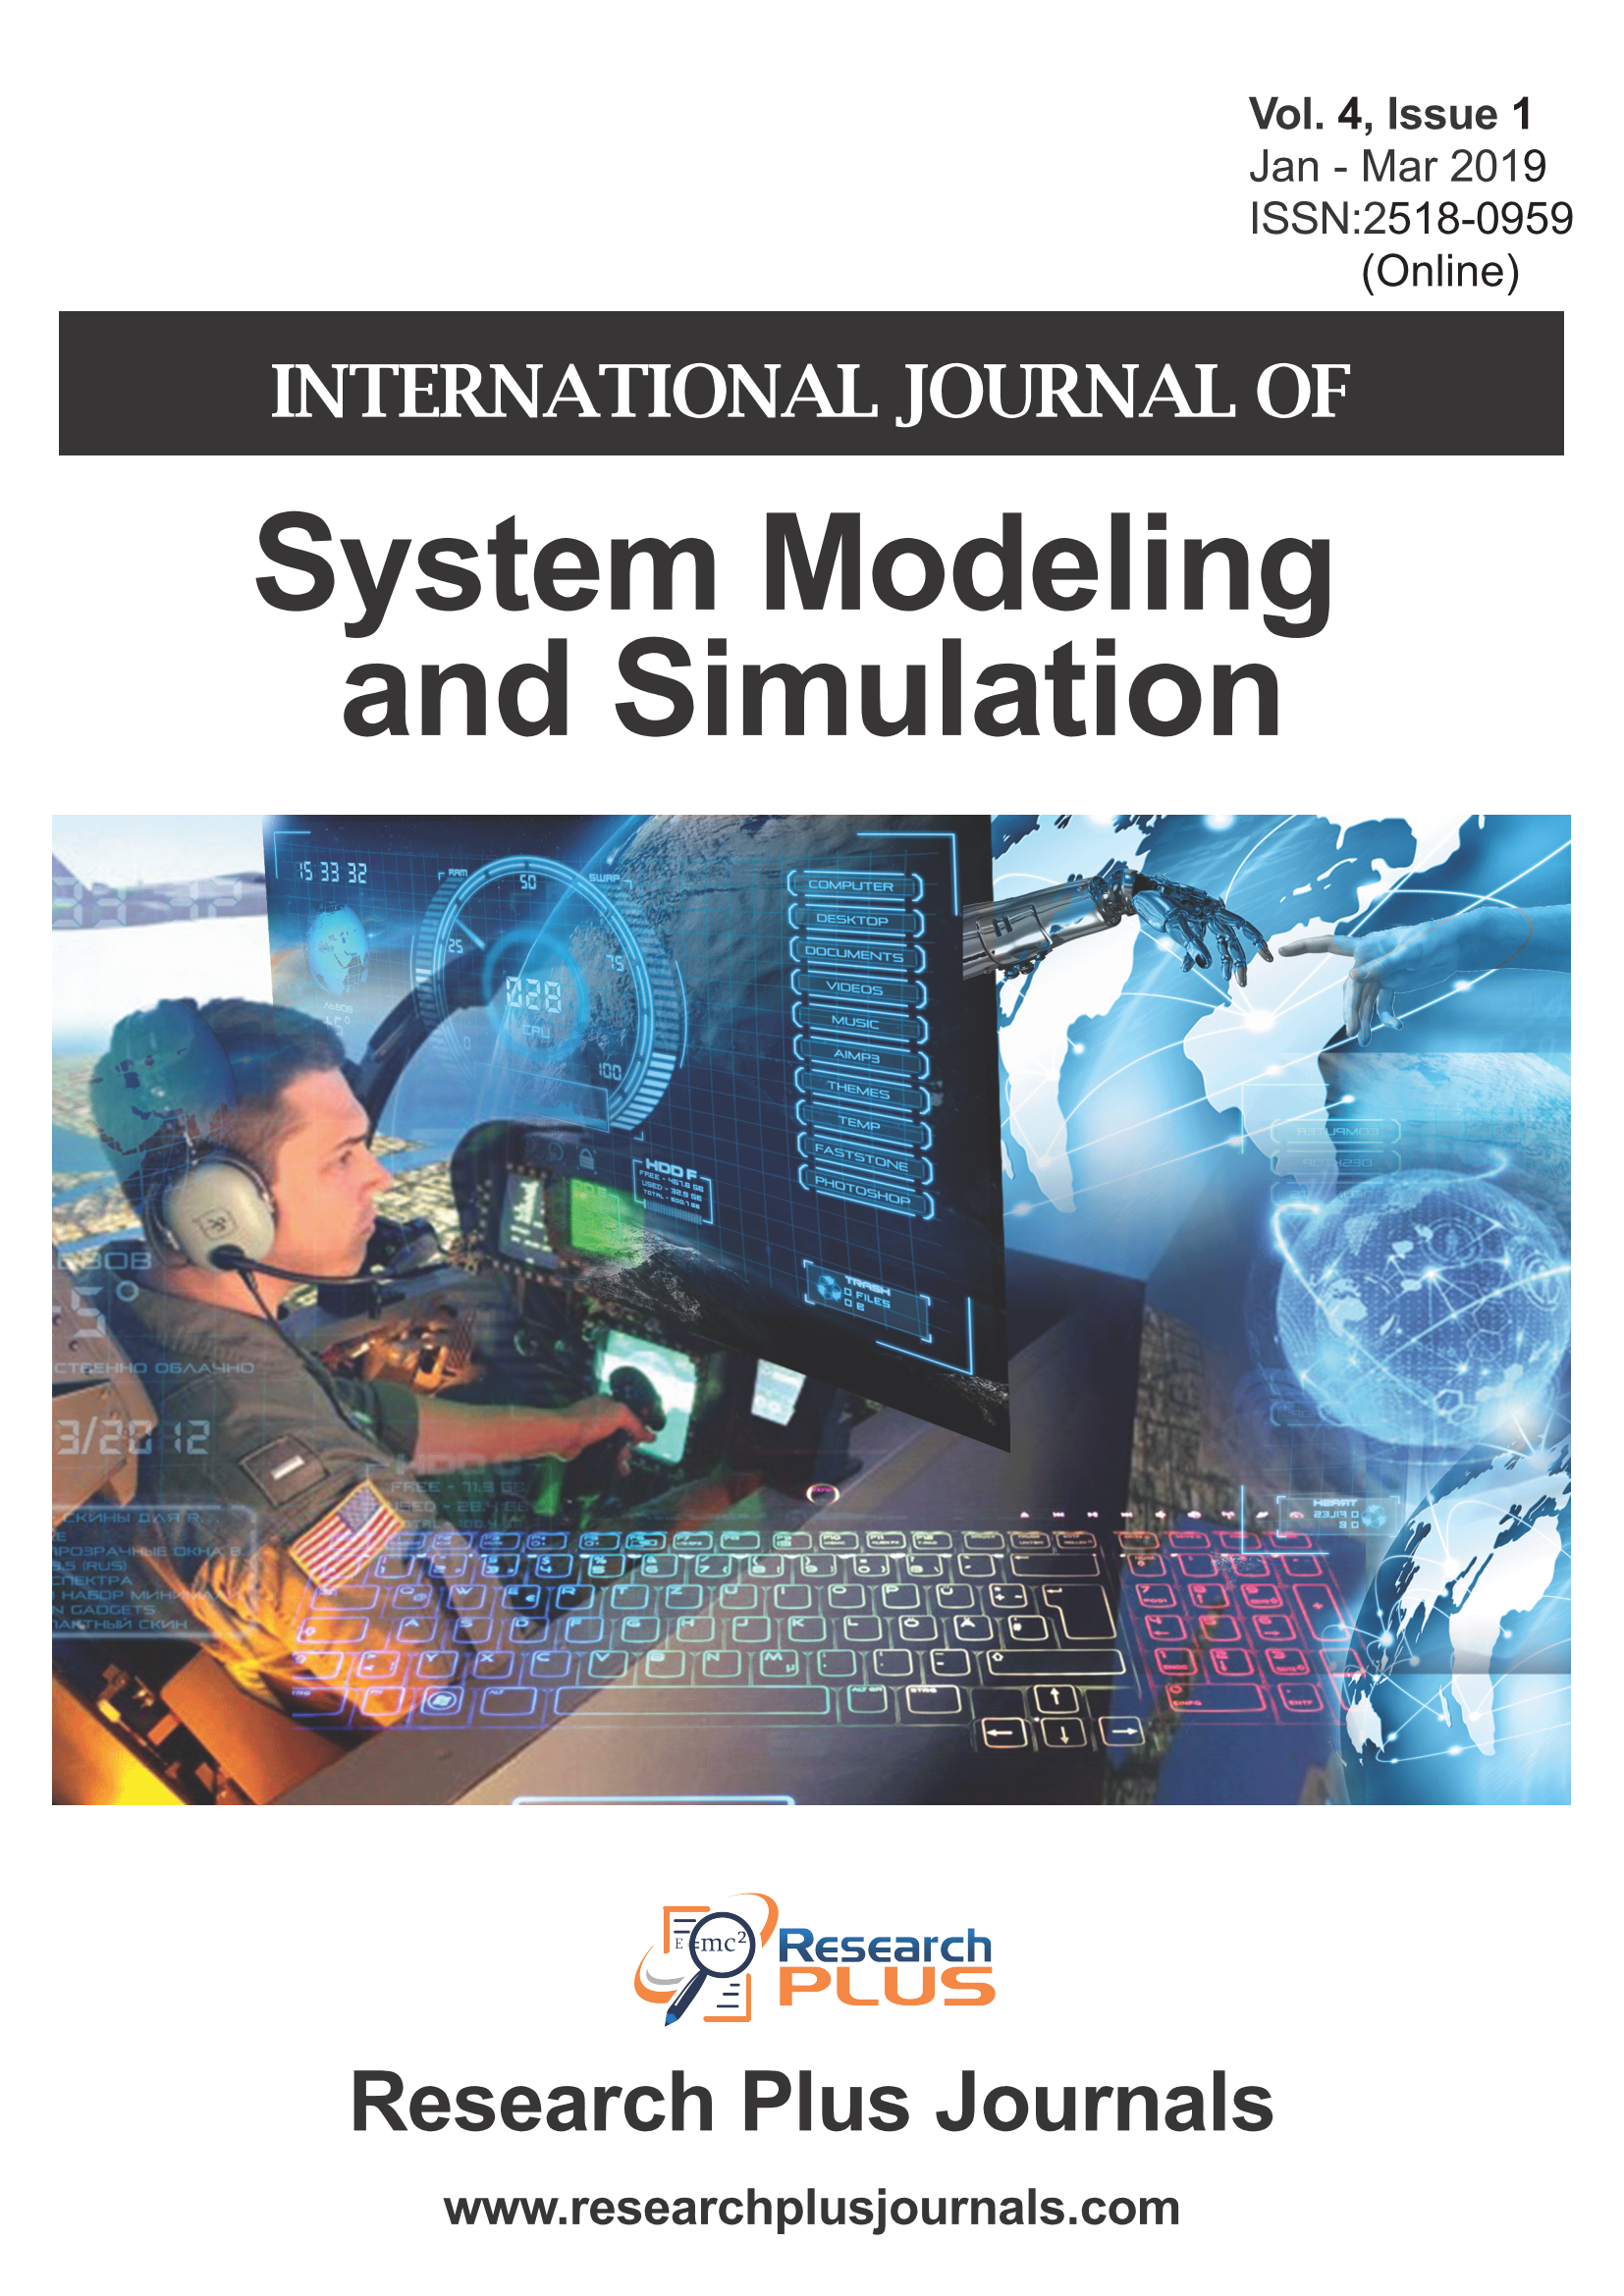 Volume 4, Issue 1, International Journal of System Modeling and Simulation (IJSMS)  (Online ISSN: 2518-0959)